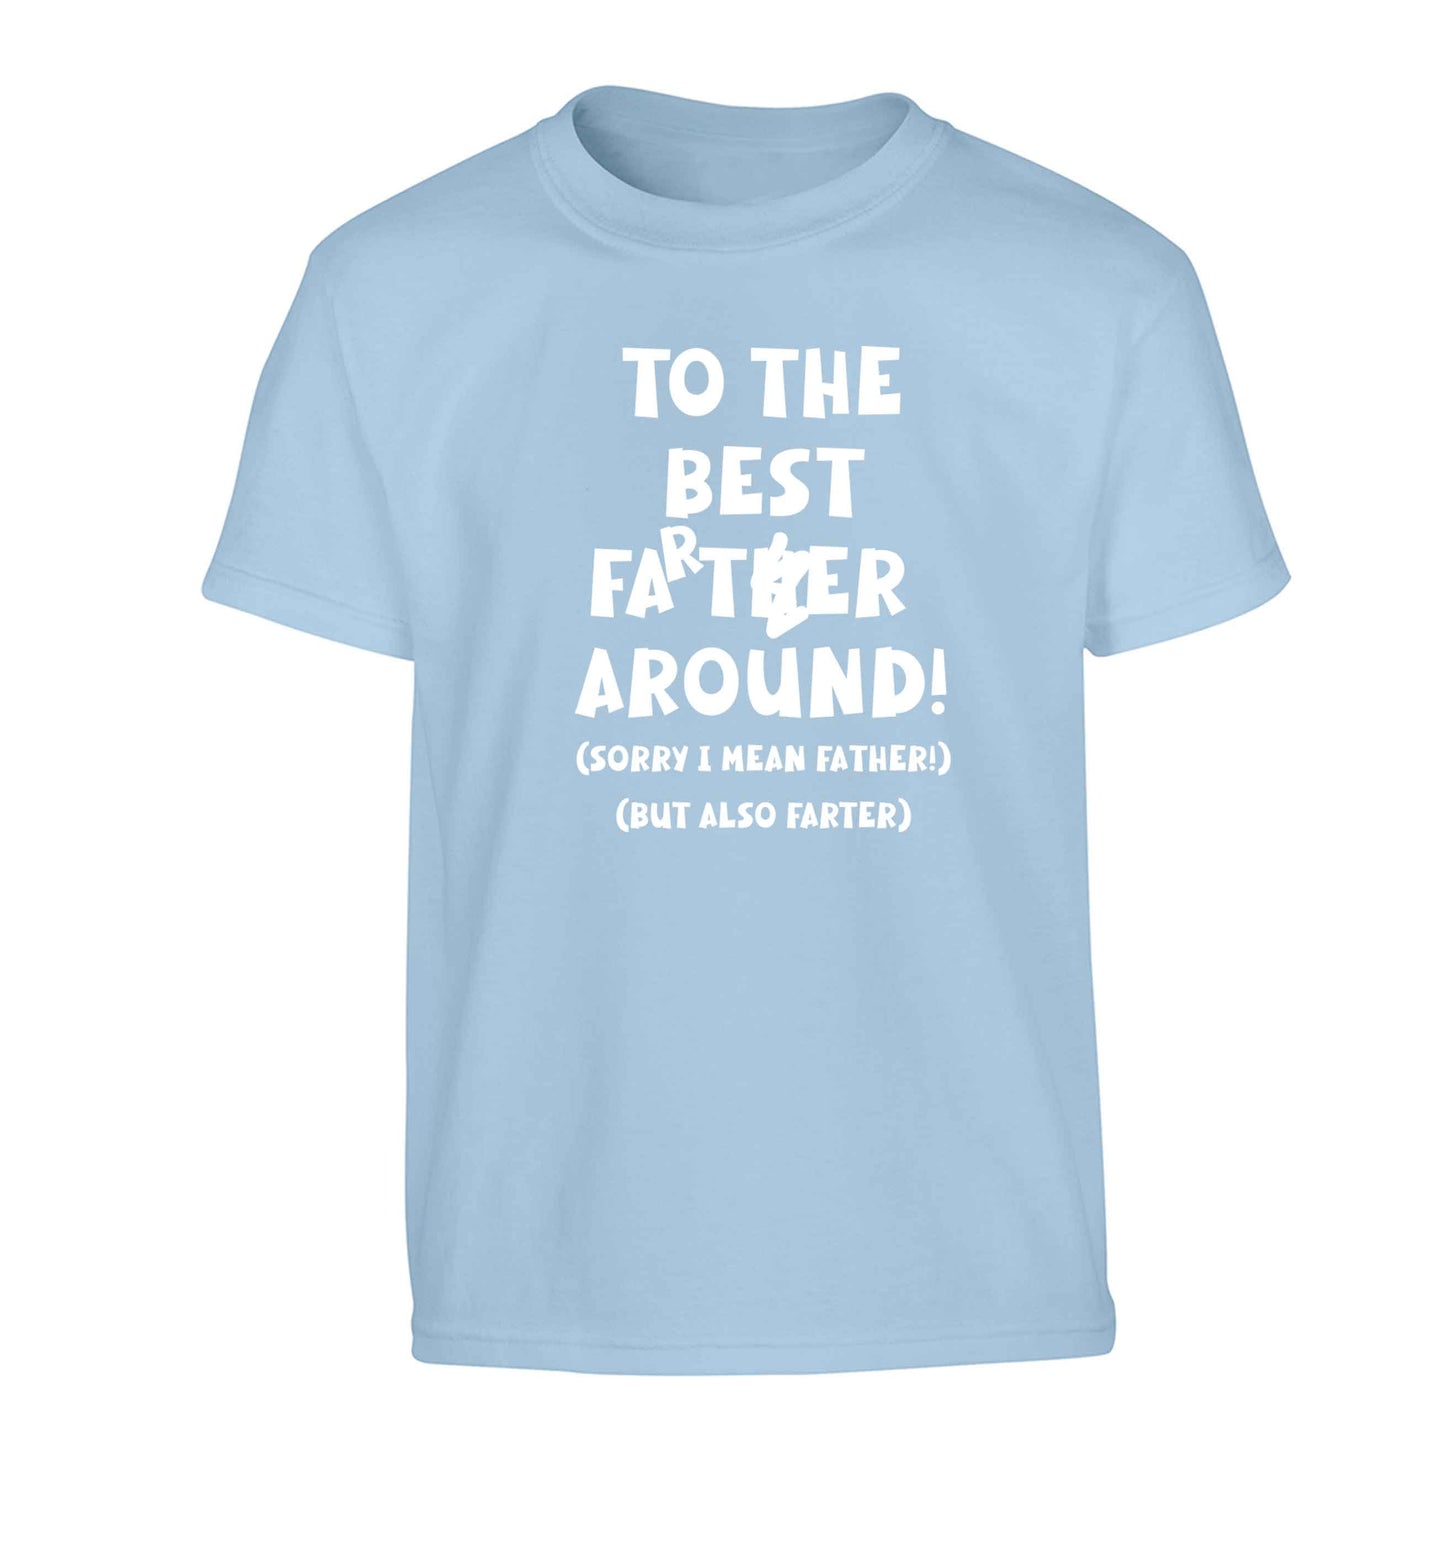 To the best farter around! Sorry I mean father, but also farter Children's light blue Tshirt 12-13 Years